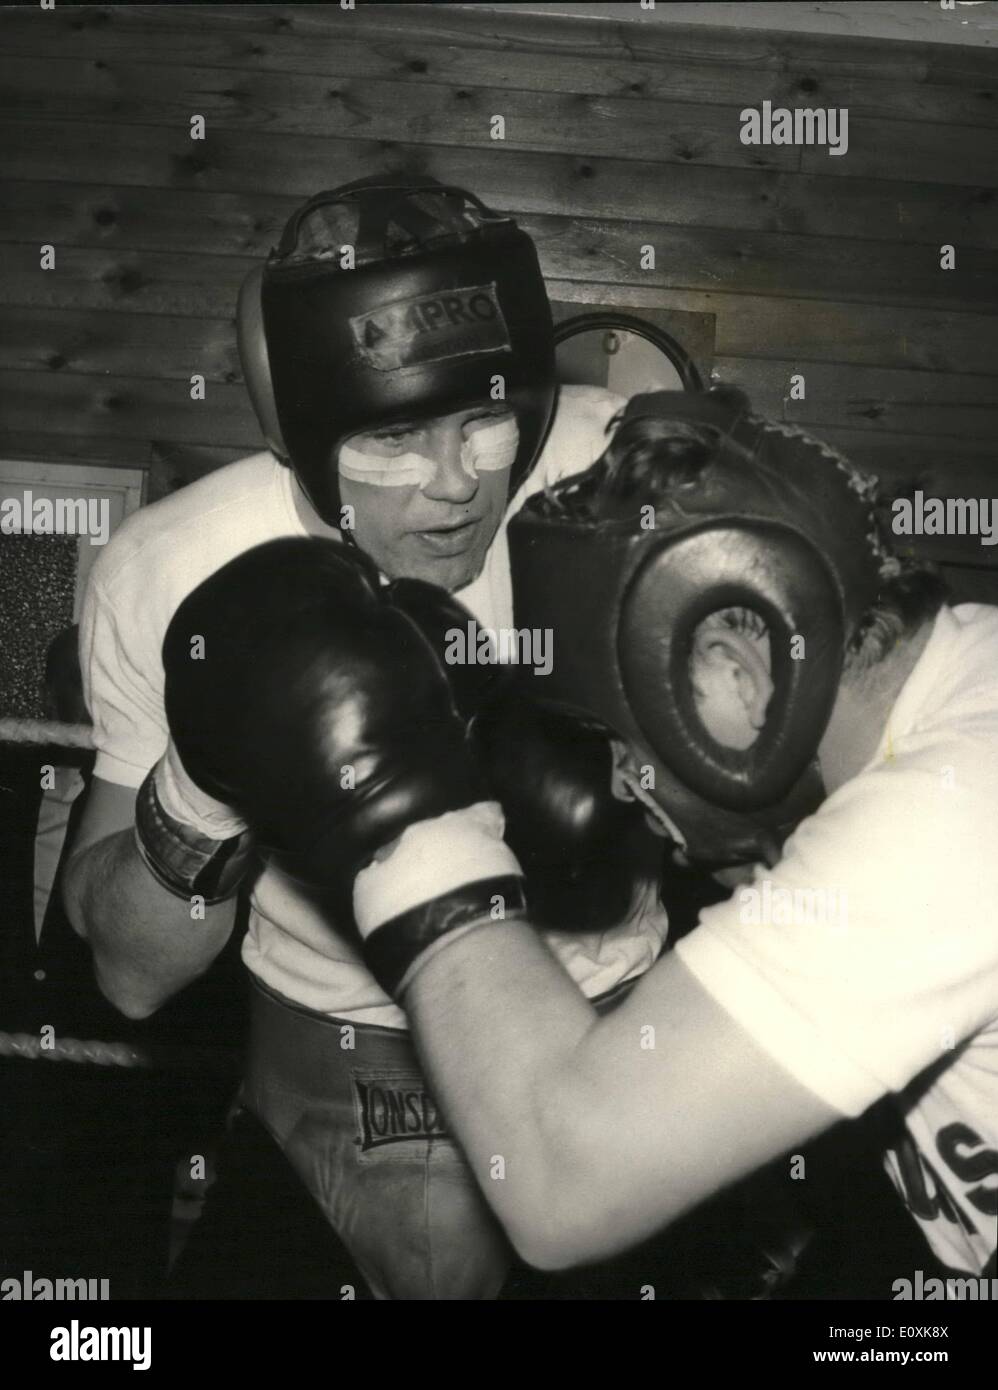 Mar. 03, 1967 - BILLY WALKER TRAINS FOR MILDENBERGER FIGHT. BILLY WALKER, WAS TRAINING TODAY AT FOBBING, NEAR PITSEA, ESSEX, FOR HIS EUROPEAN HEAVYWEIGHT TITTLE FIGHT AGAINST KARL MILDENBERGER, AT WEMBLEY ON MARCH 21. KEYSTONE PHOTO SHOWS: BILLY WALKER pictured during a sparring spell at Fabbing today. Stock Photo